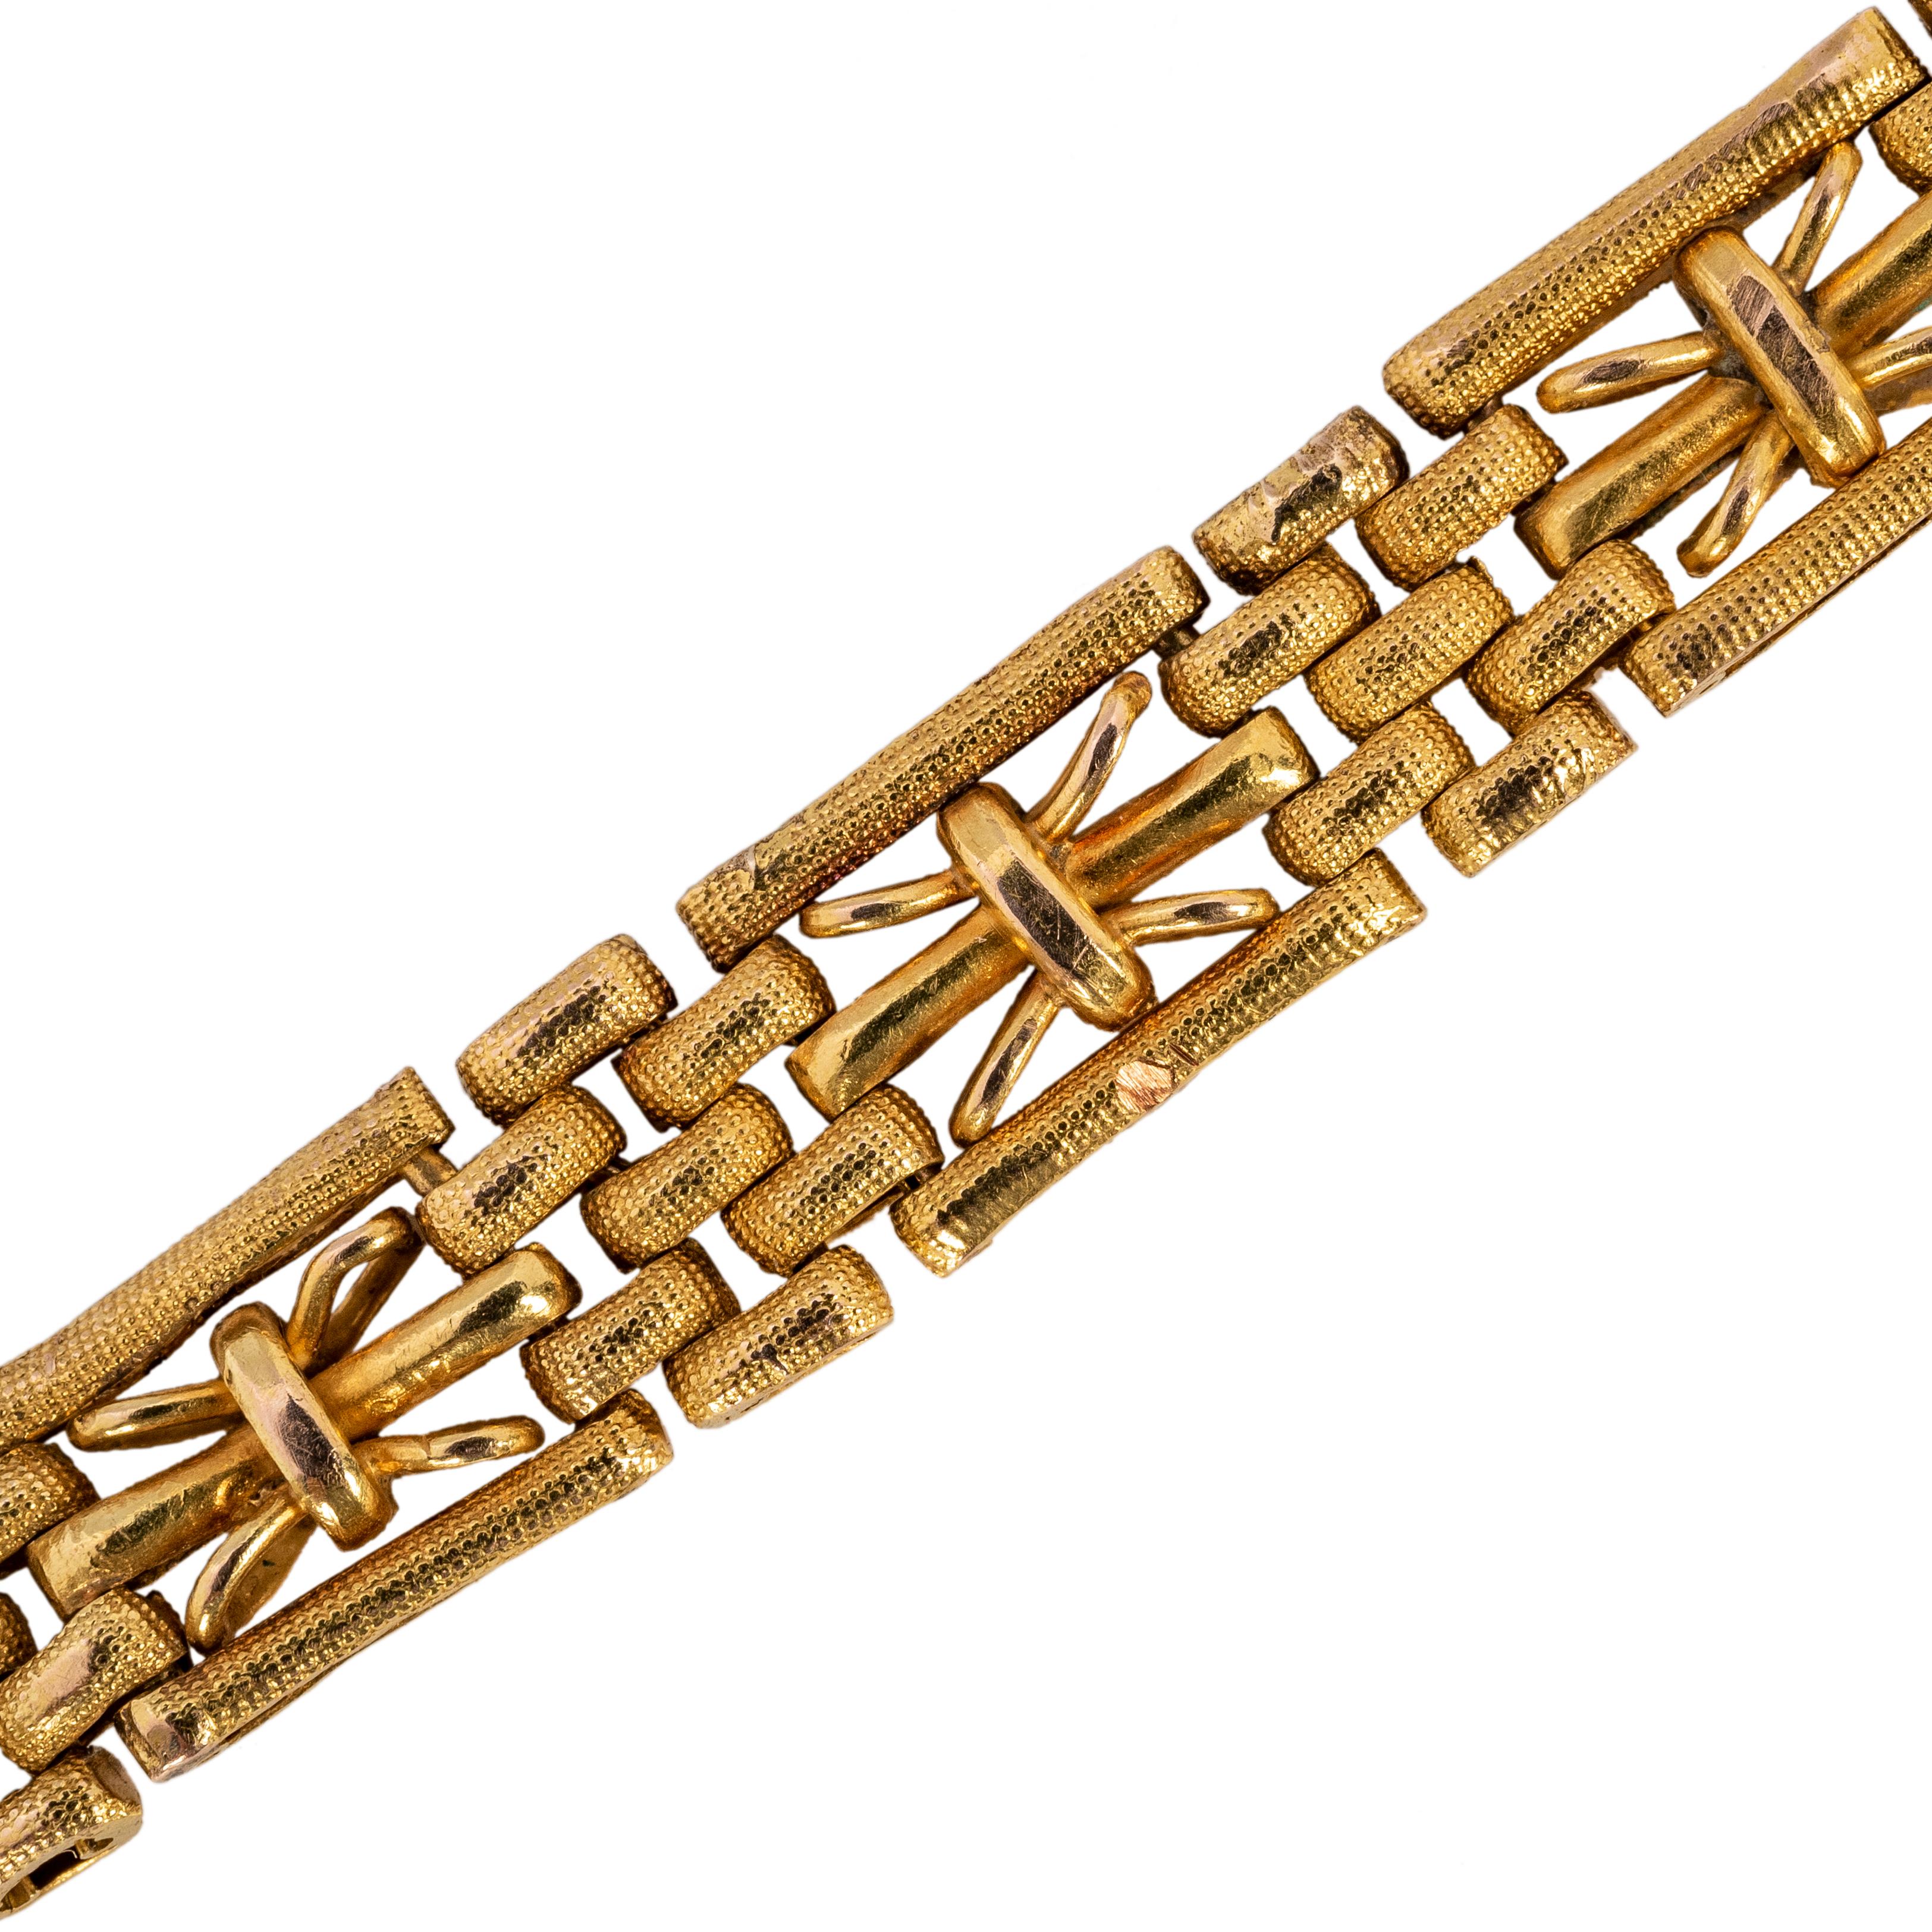 From the Romanov era period of Tsar Nicholas II, a masterful Russian bracelet of matte and polished 14k yellow gold, designed as sections of horizontal textured links alternating with polished central links finished front and back.

Moscow, 1908-17,